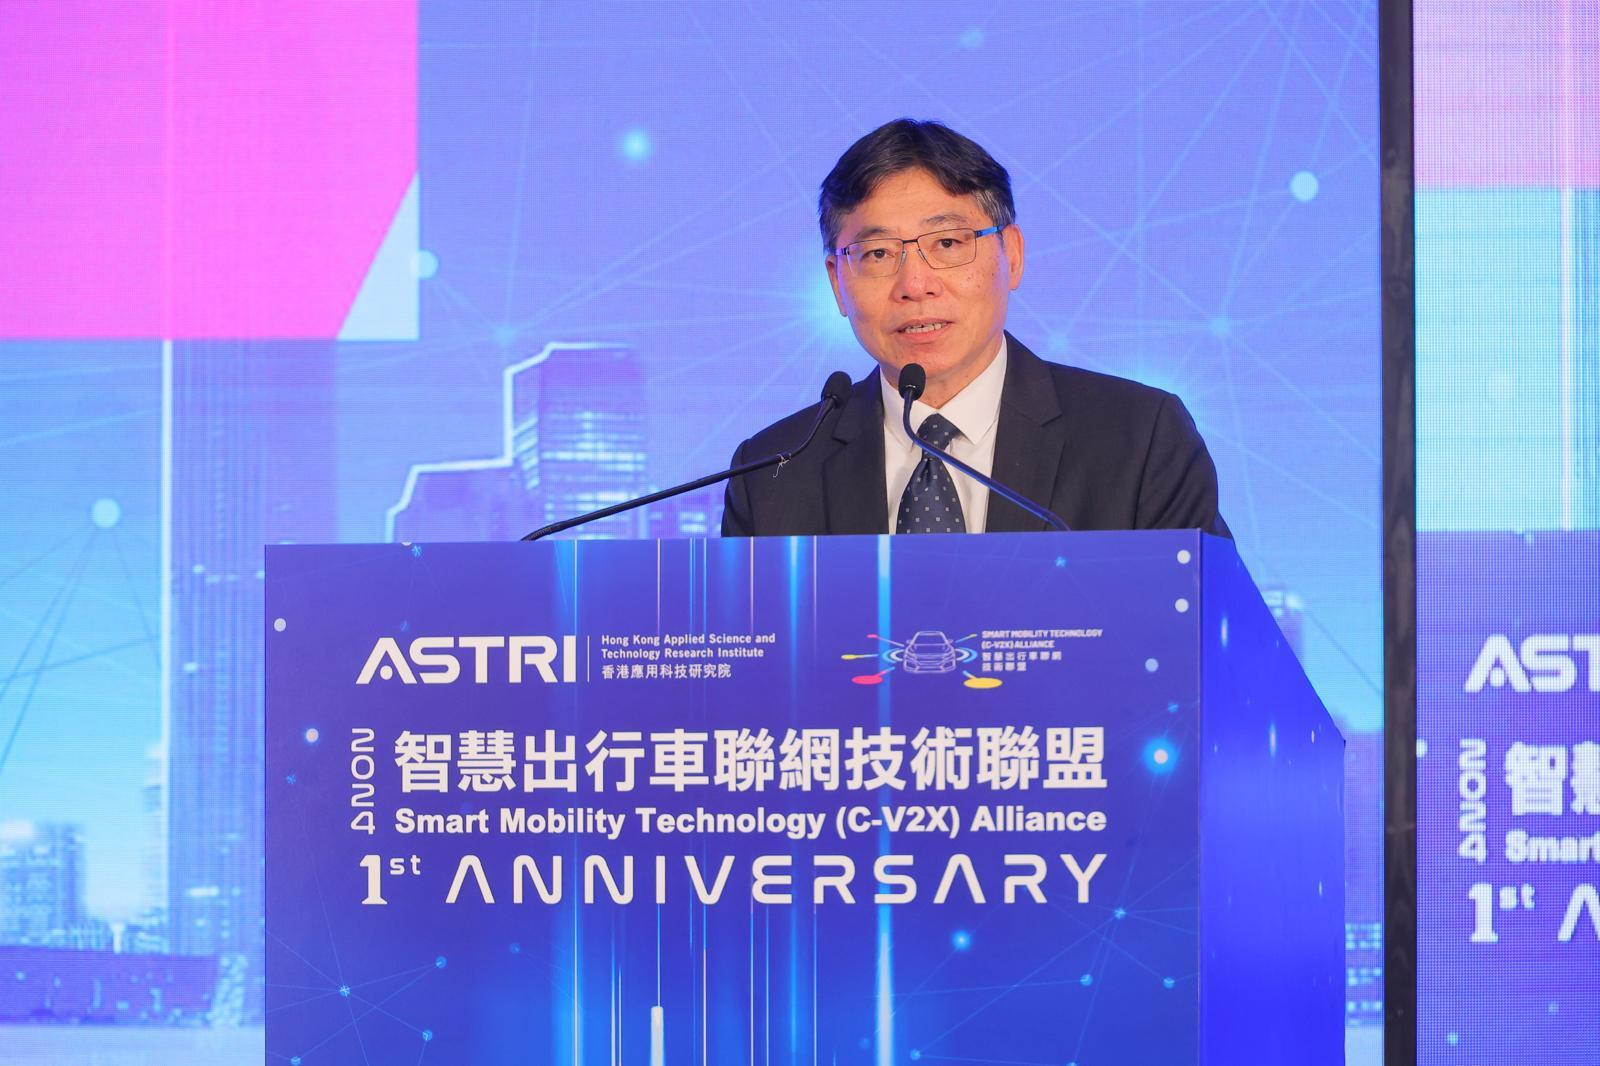 The Secretary for Transport and Logistics, Mr Lam Sai-hung, speaks at the First Anniversary Ceremony of Smart Mobility Technology (C-V2X) Alliance today (April 15) to share with industry practitioners his views on smart mobility and the development prospect of autonomous vehicles.